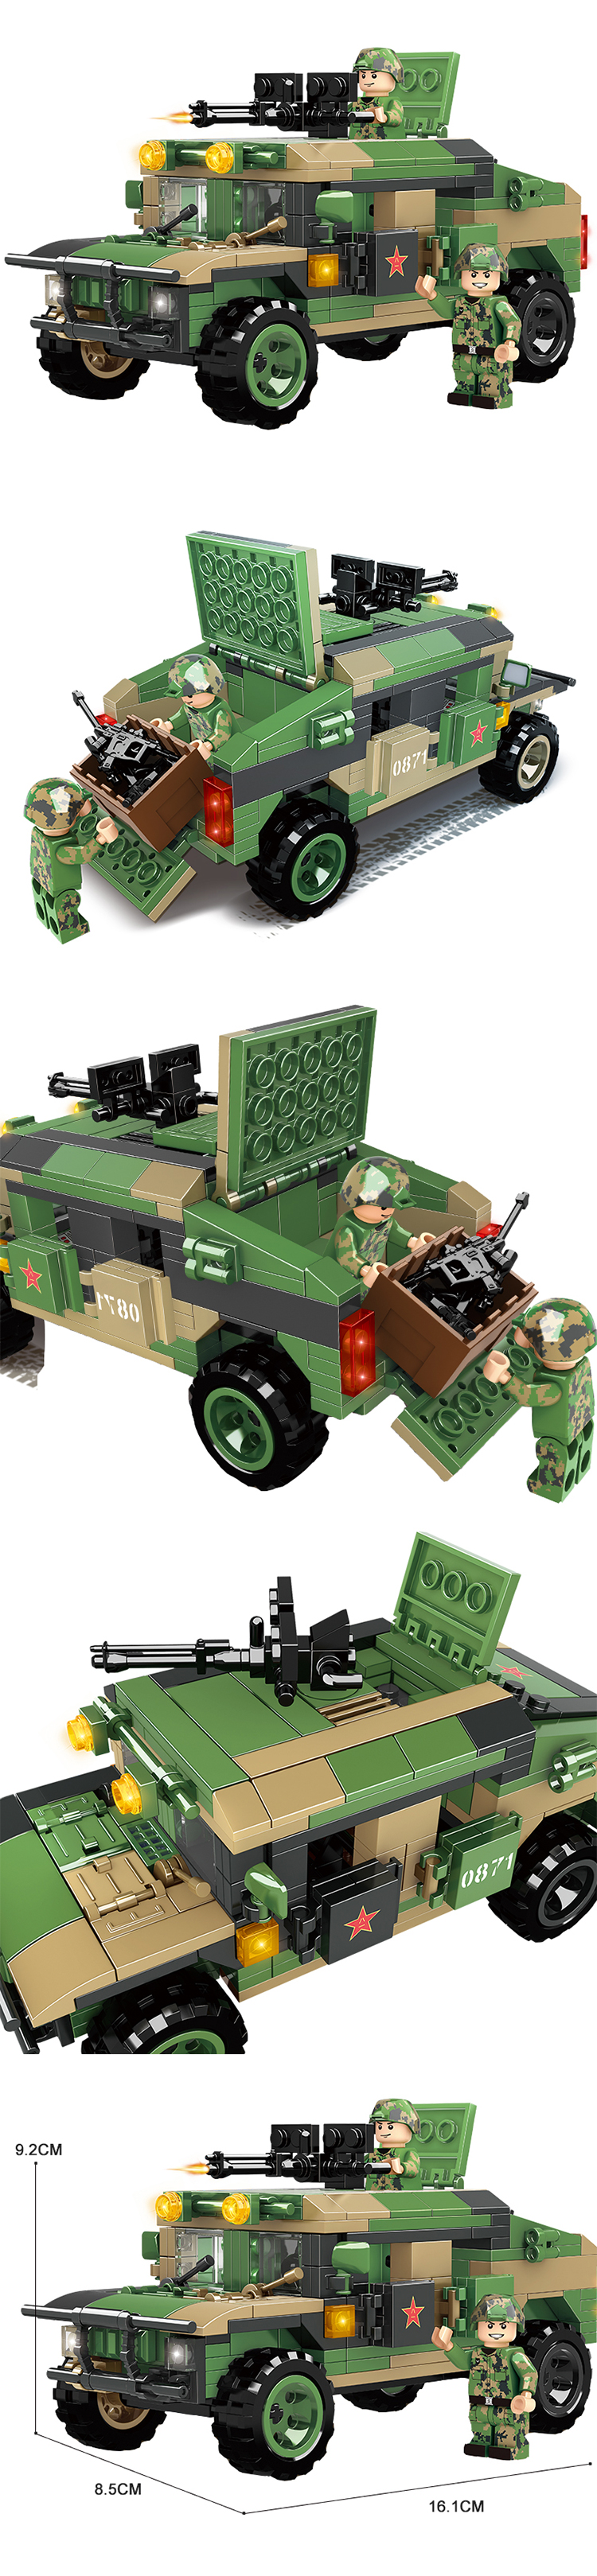 WOMA TOYS Most Popular Bricks Compatible with Major Brands Light Armored Army Vehicle Military Building Blocks toys